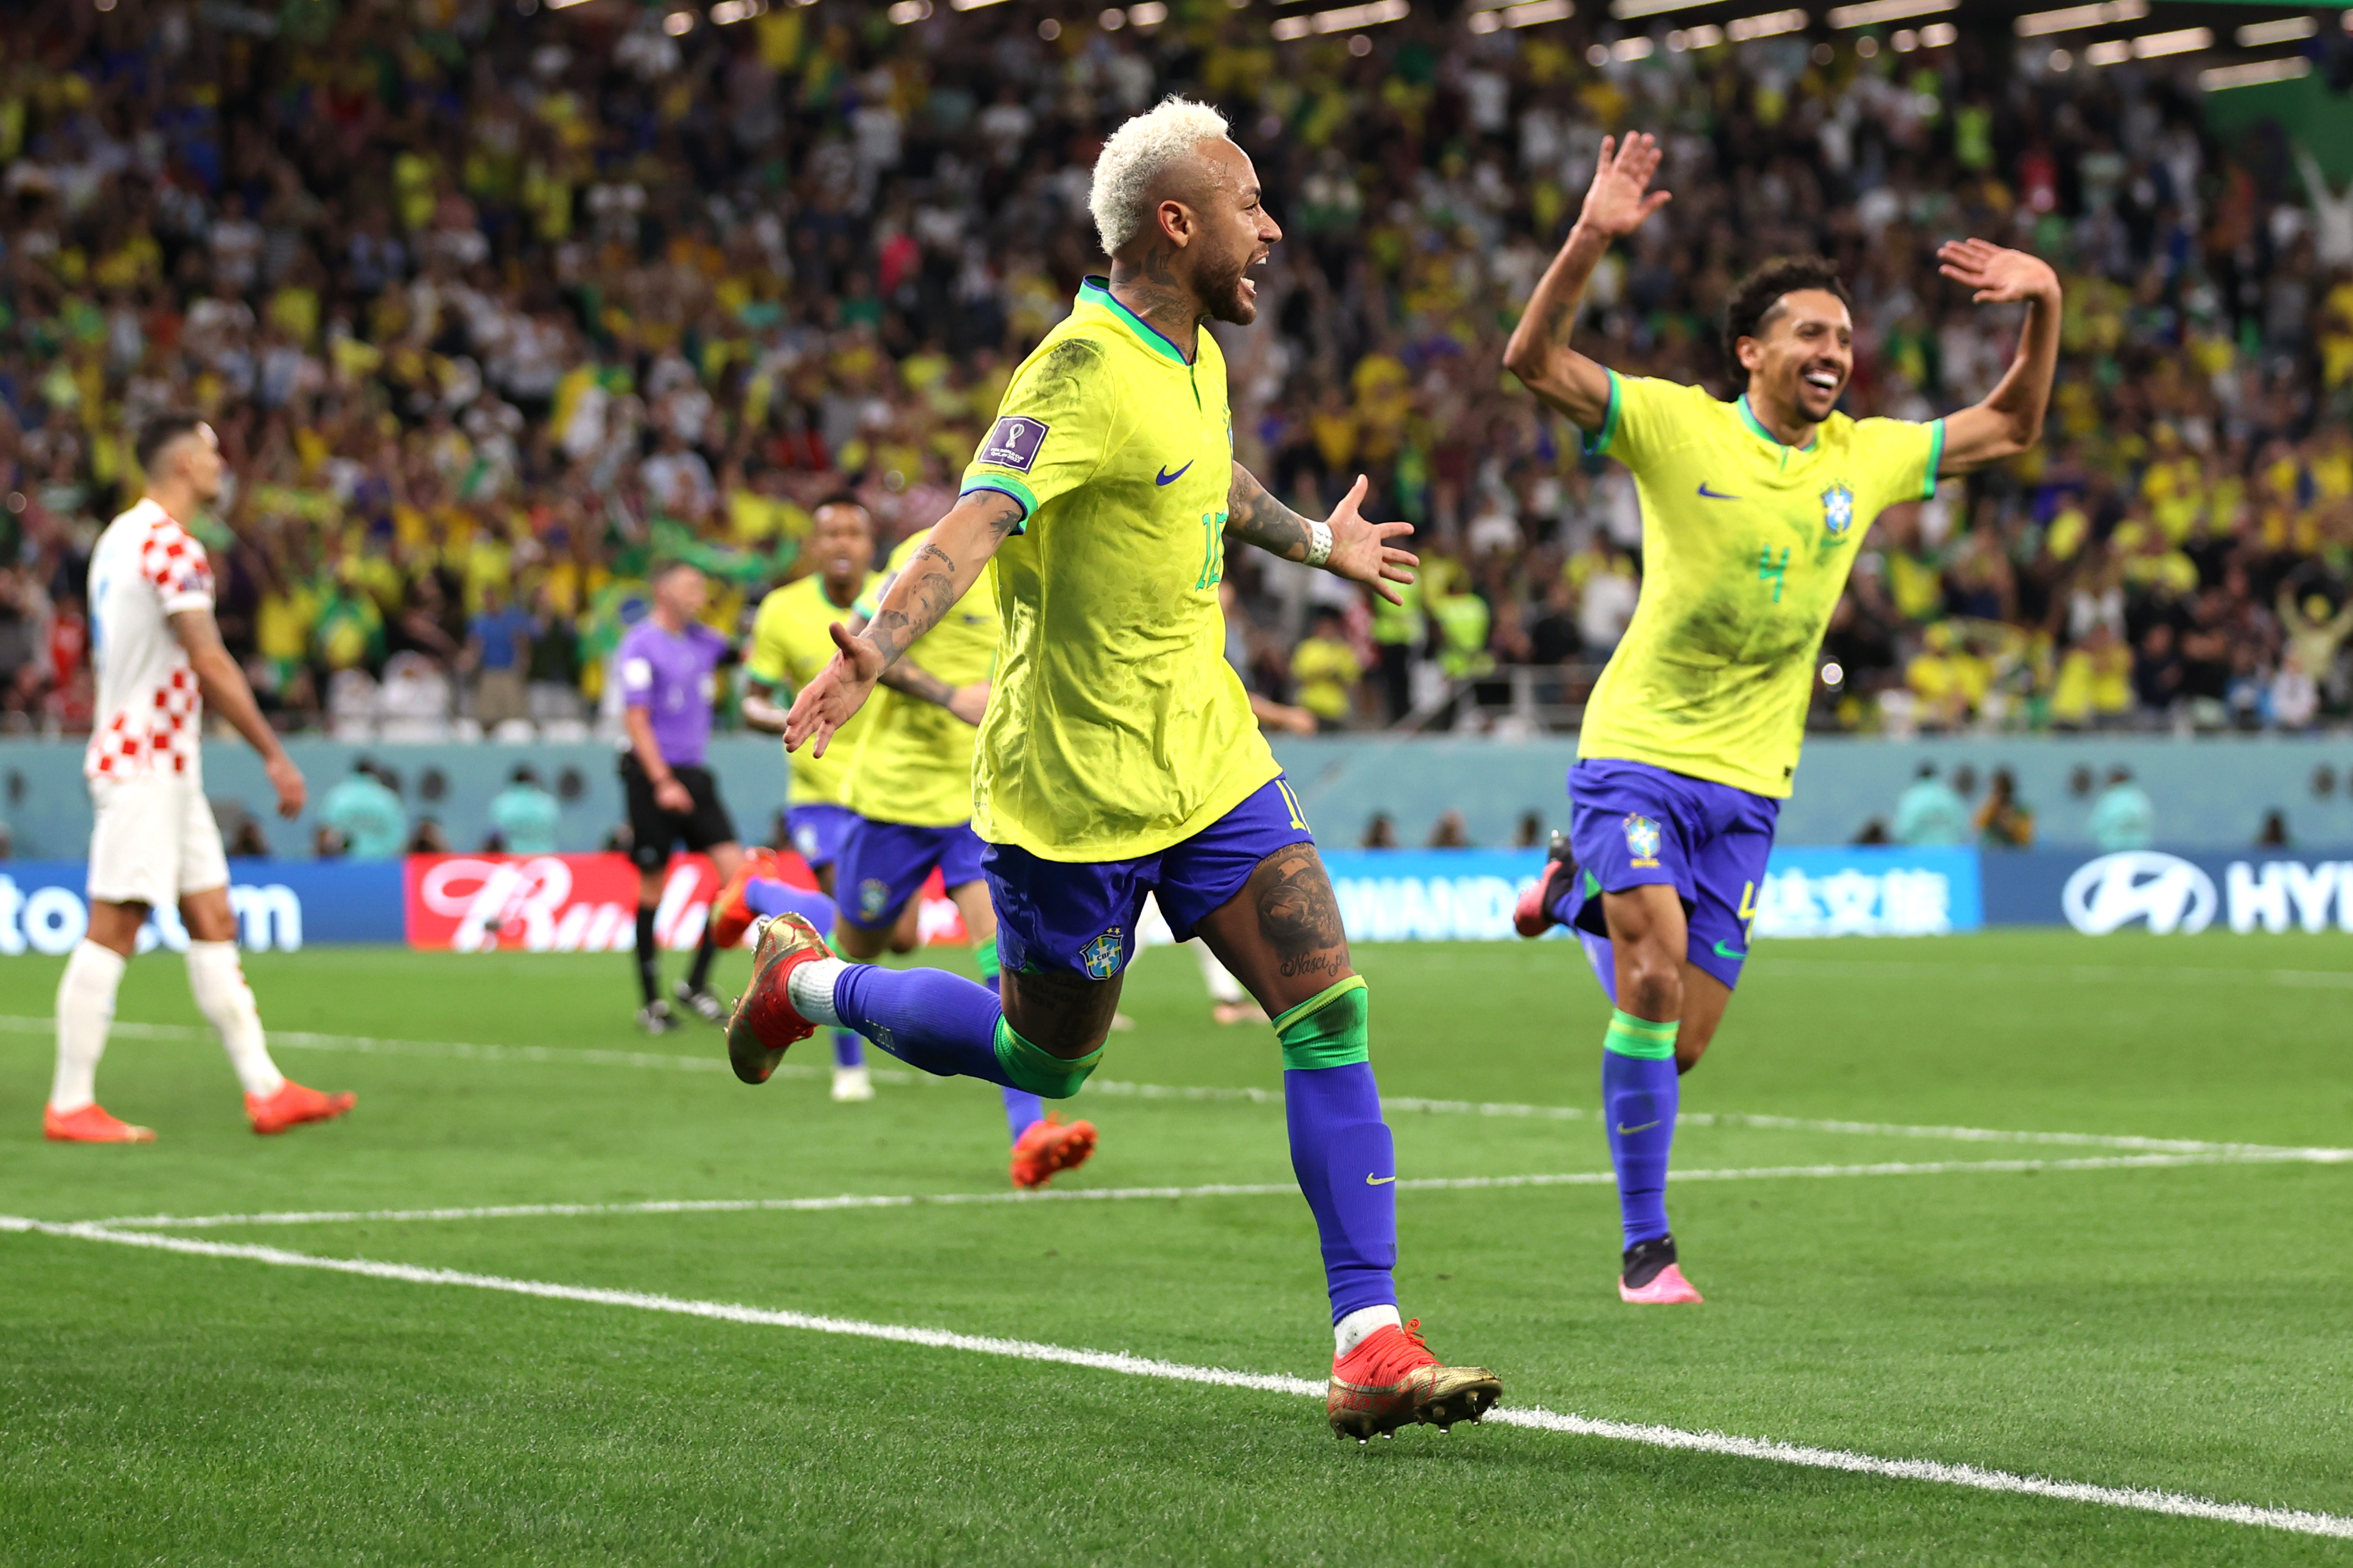 Neymar of Brazil celebrates after scoring the team's first goal during the quarter final match between Croatia and Brazil at Education City Stadium in Al Rayyan, Qatar on December 9.